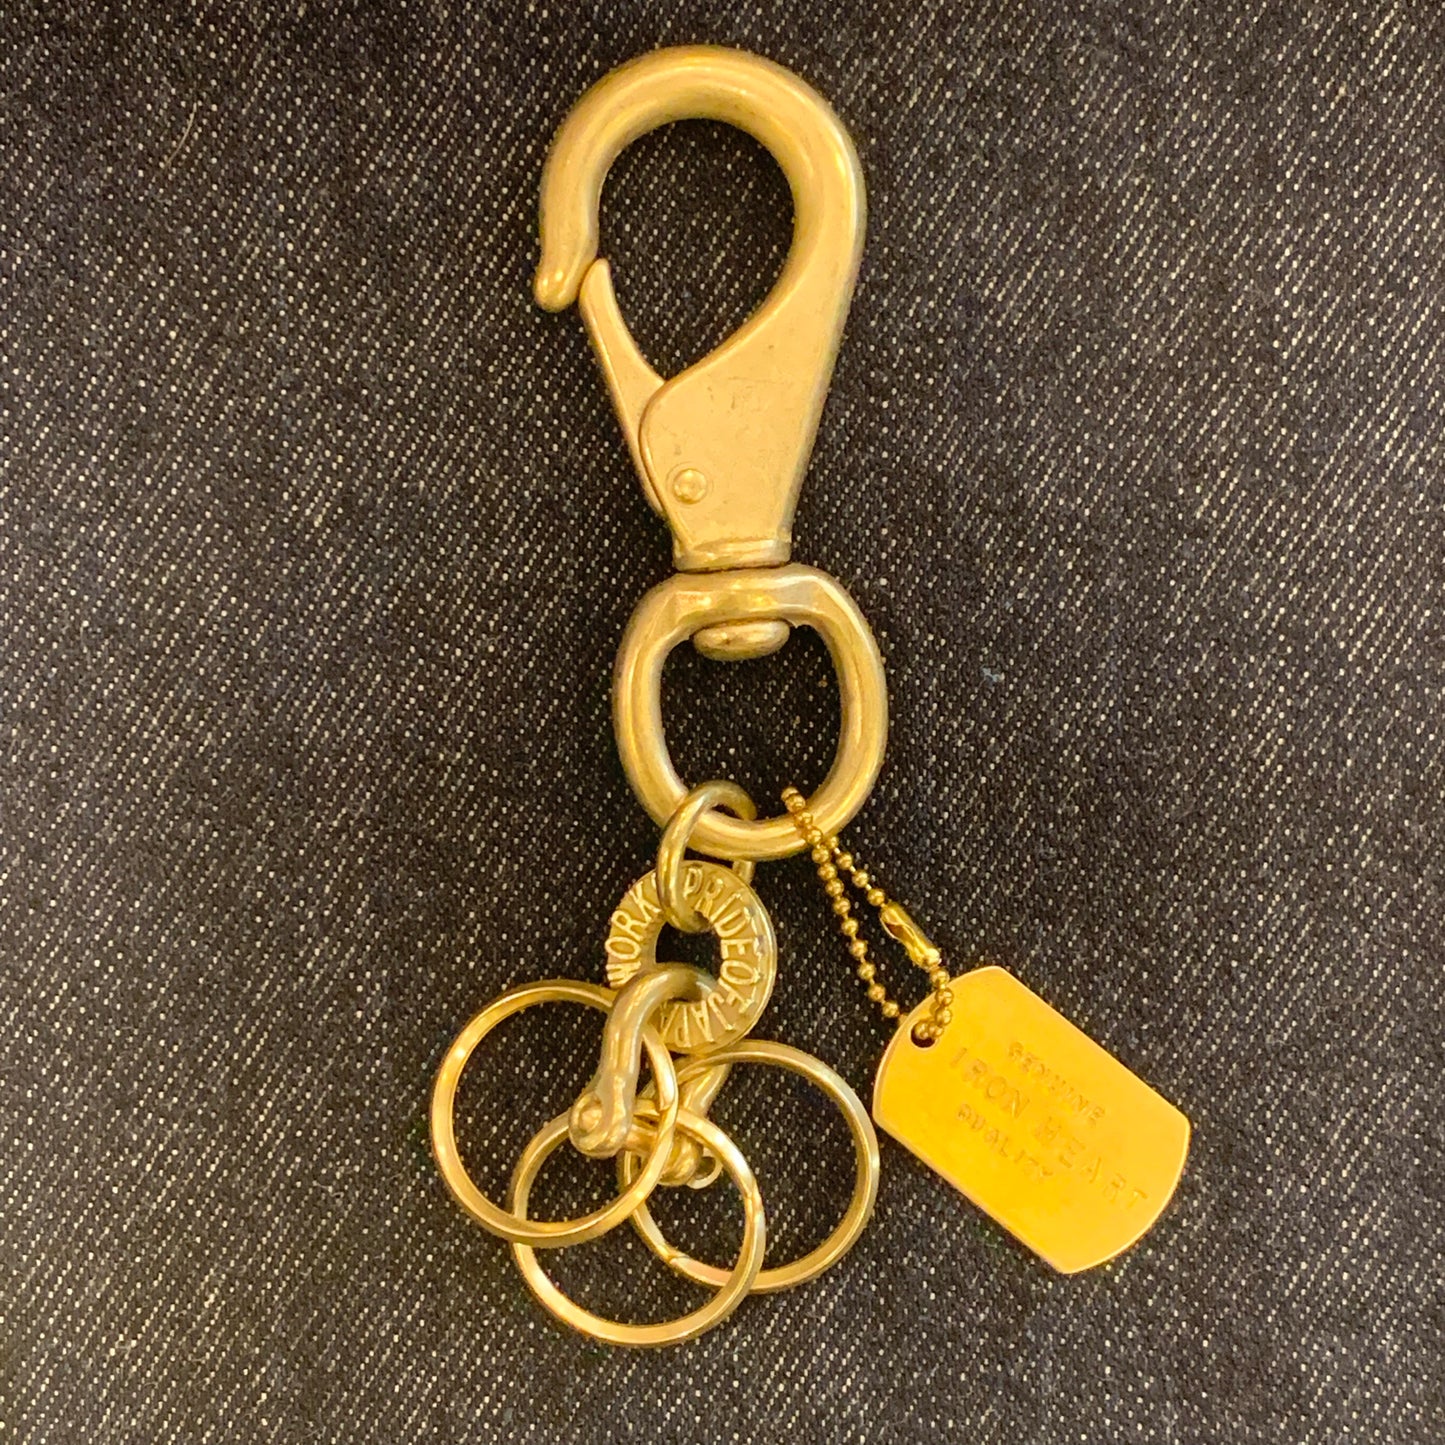 Iron Heart W-8 Large Key Clip with Swivel and Rings Brass